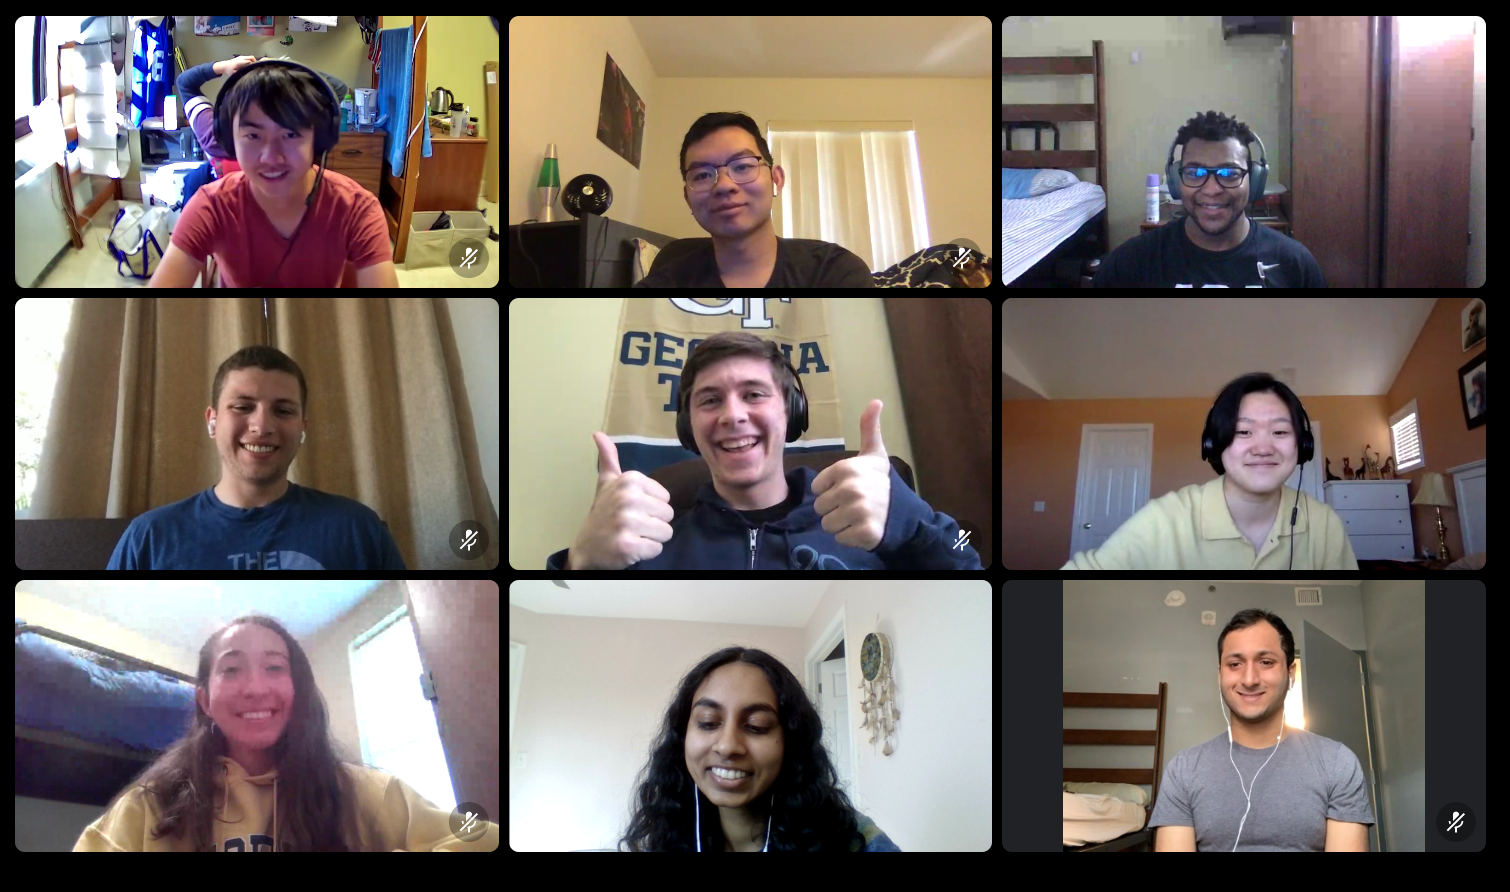 Despite not being able to meet in person, the Ray team bonded over a shared love of sleep, dark mode, and Among Us!